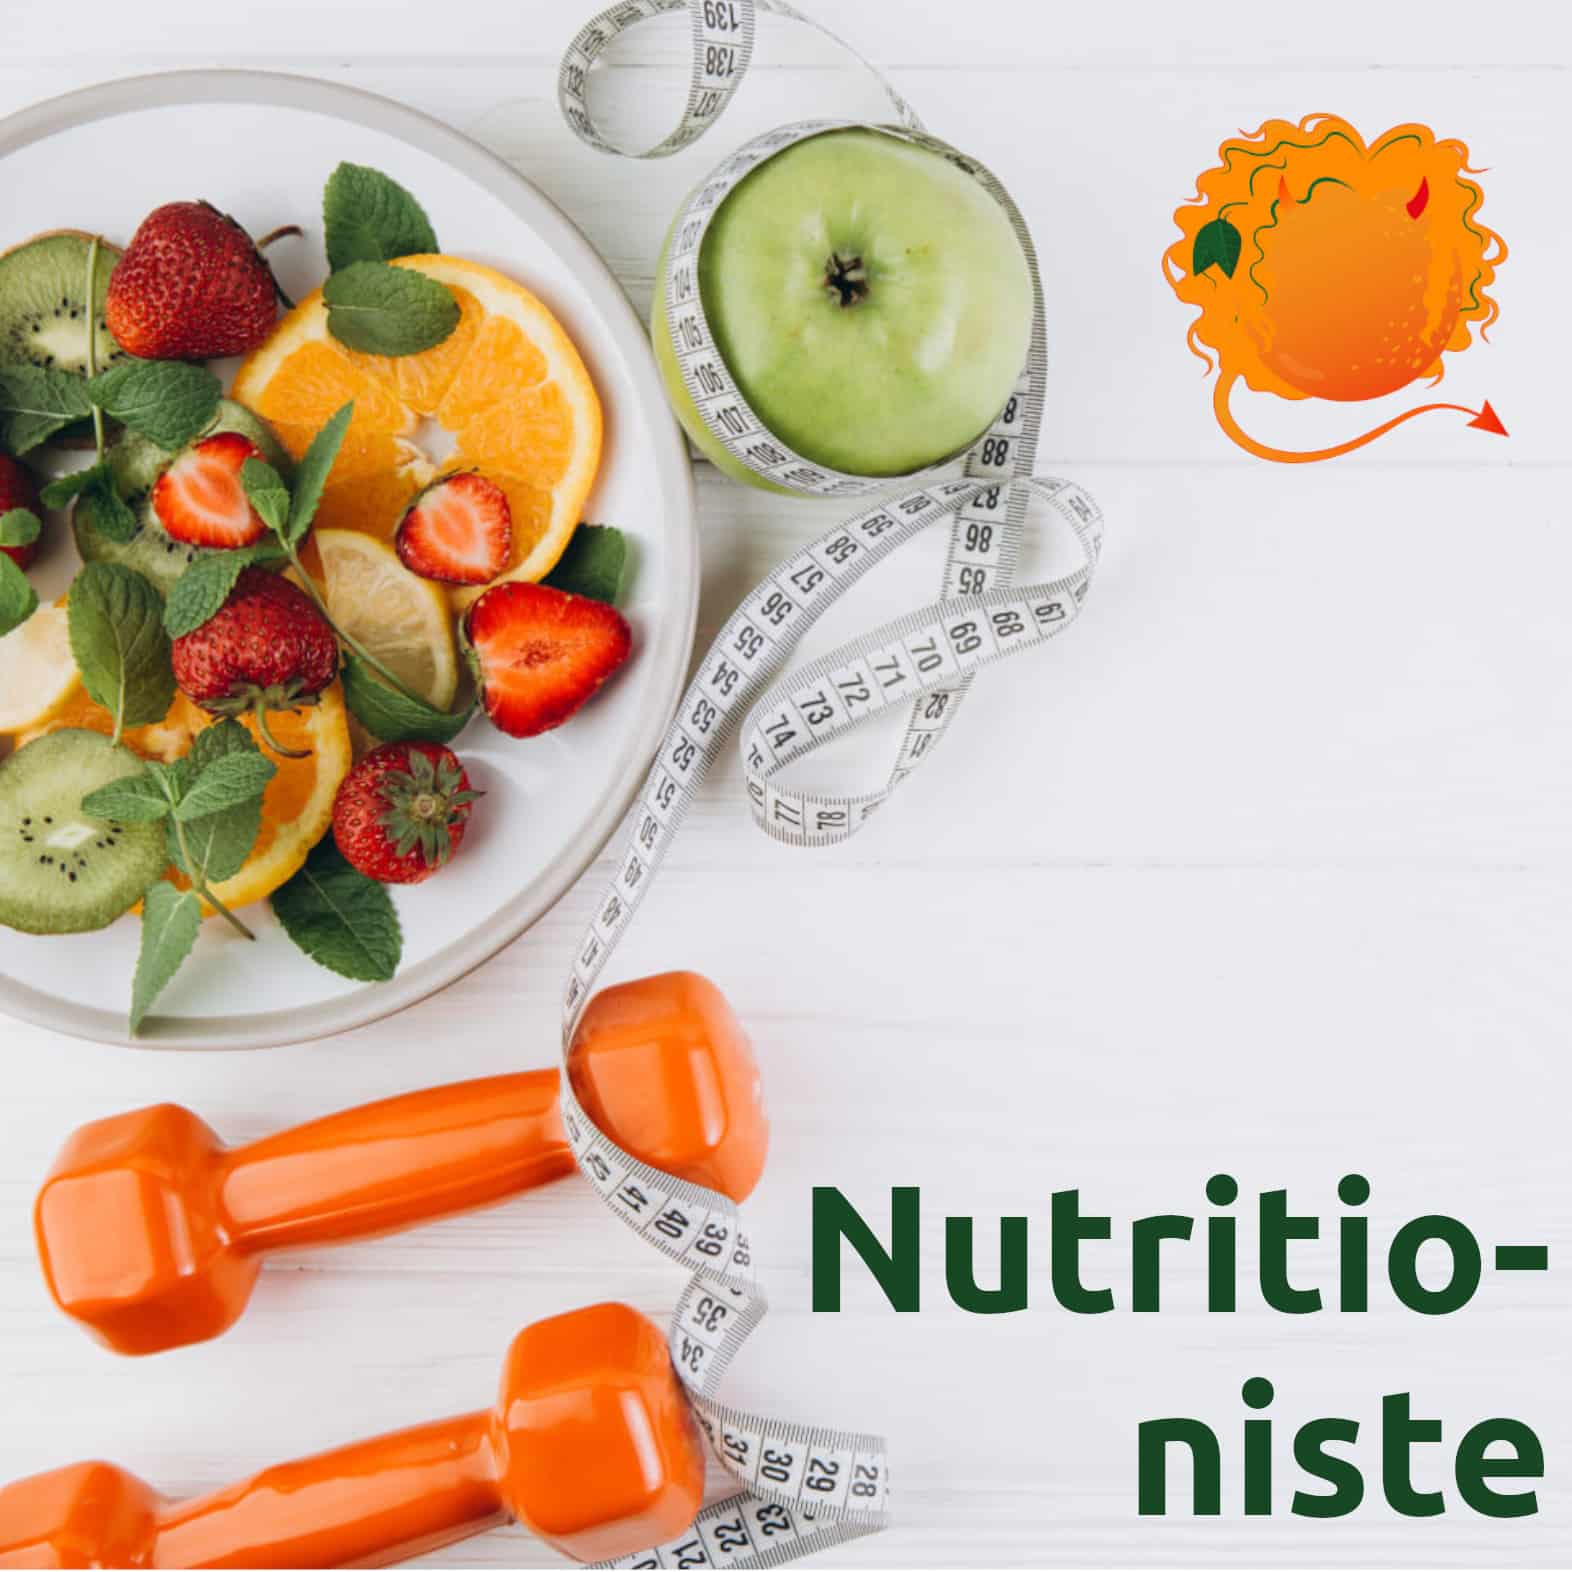 Nutritionniste